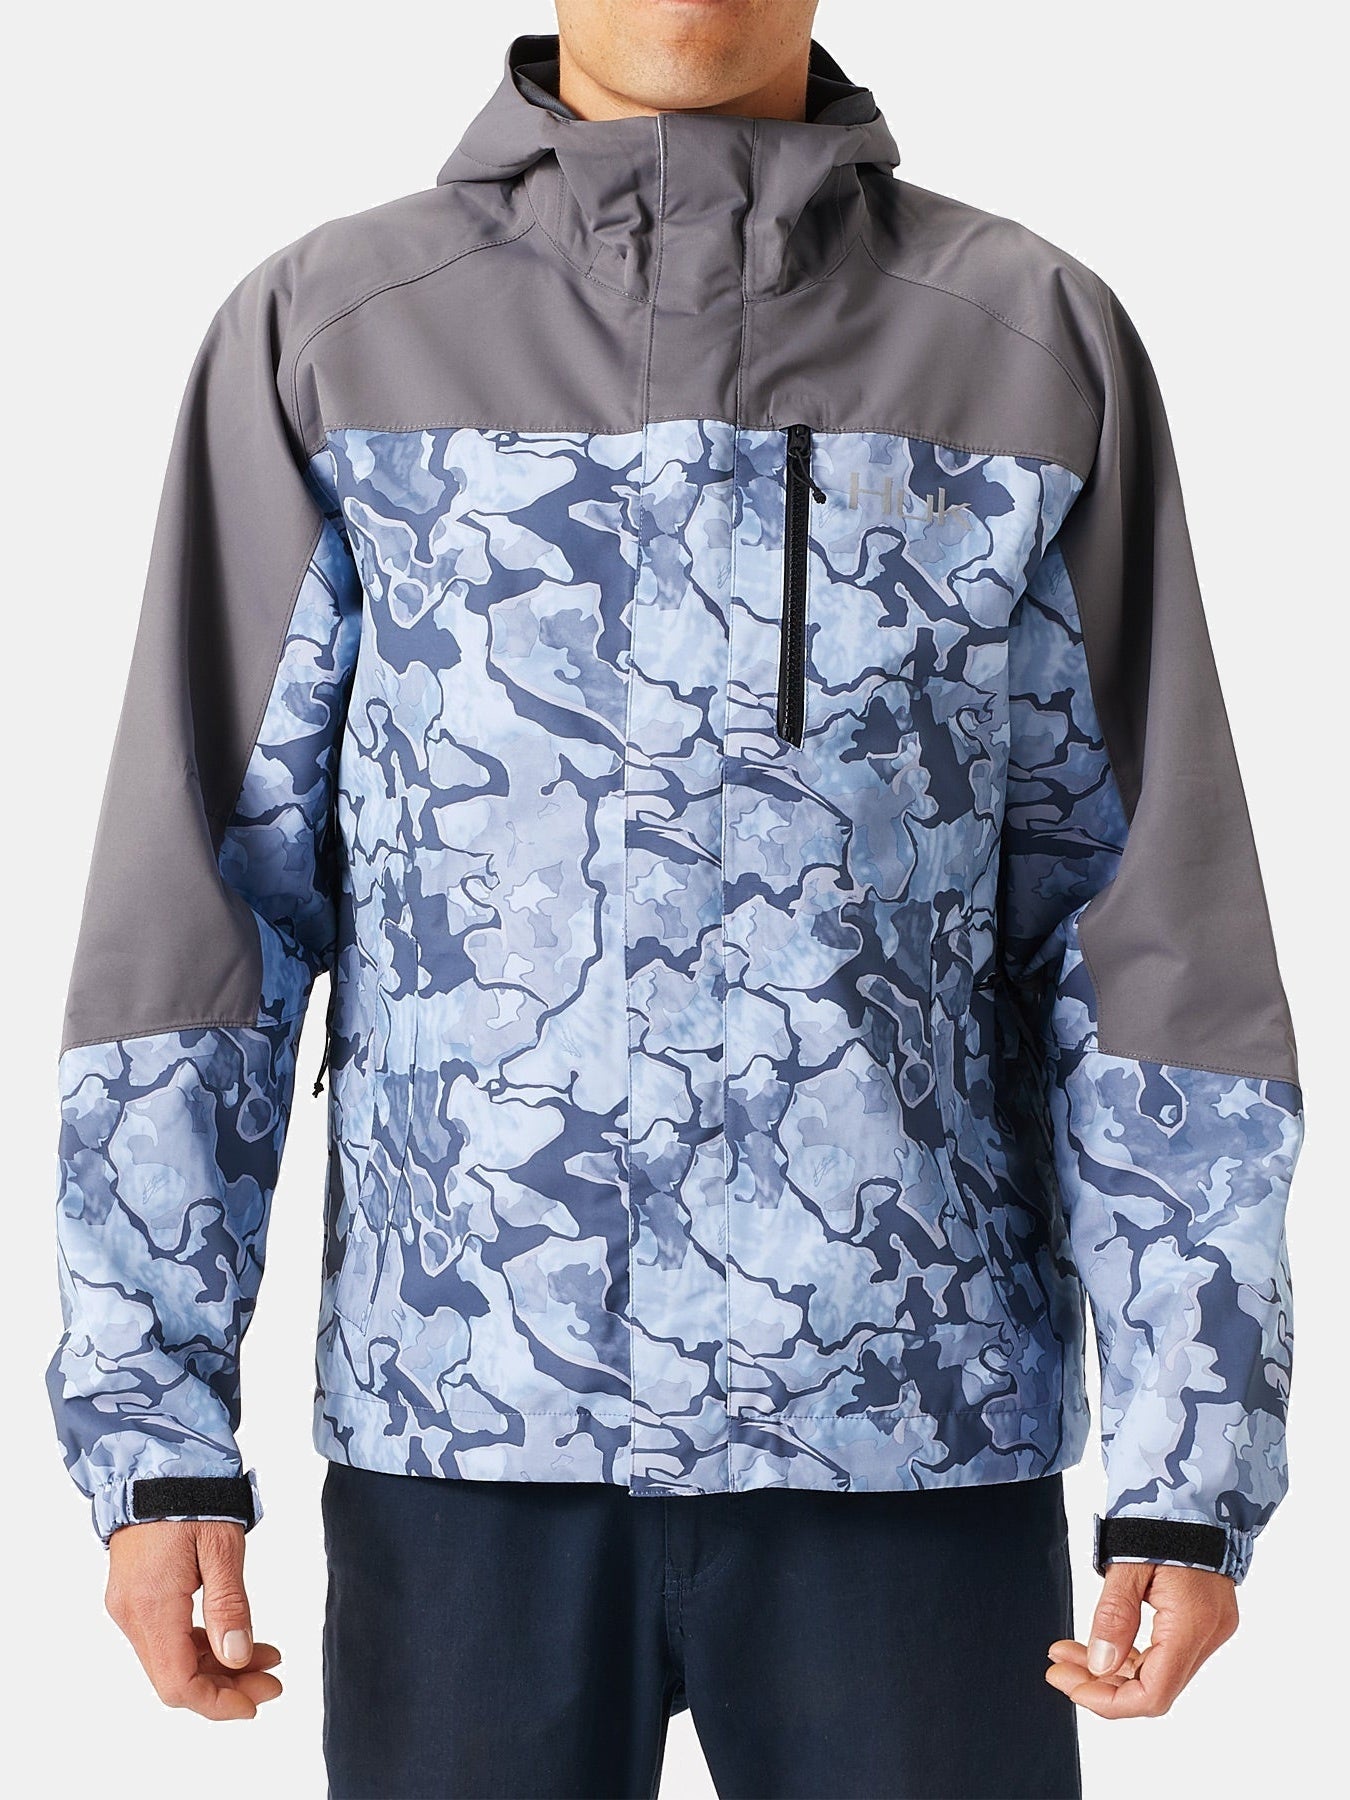 Details about   HUK Grand Banks Camo Erie Jacket 